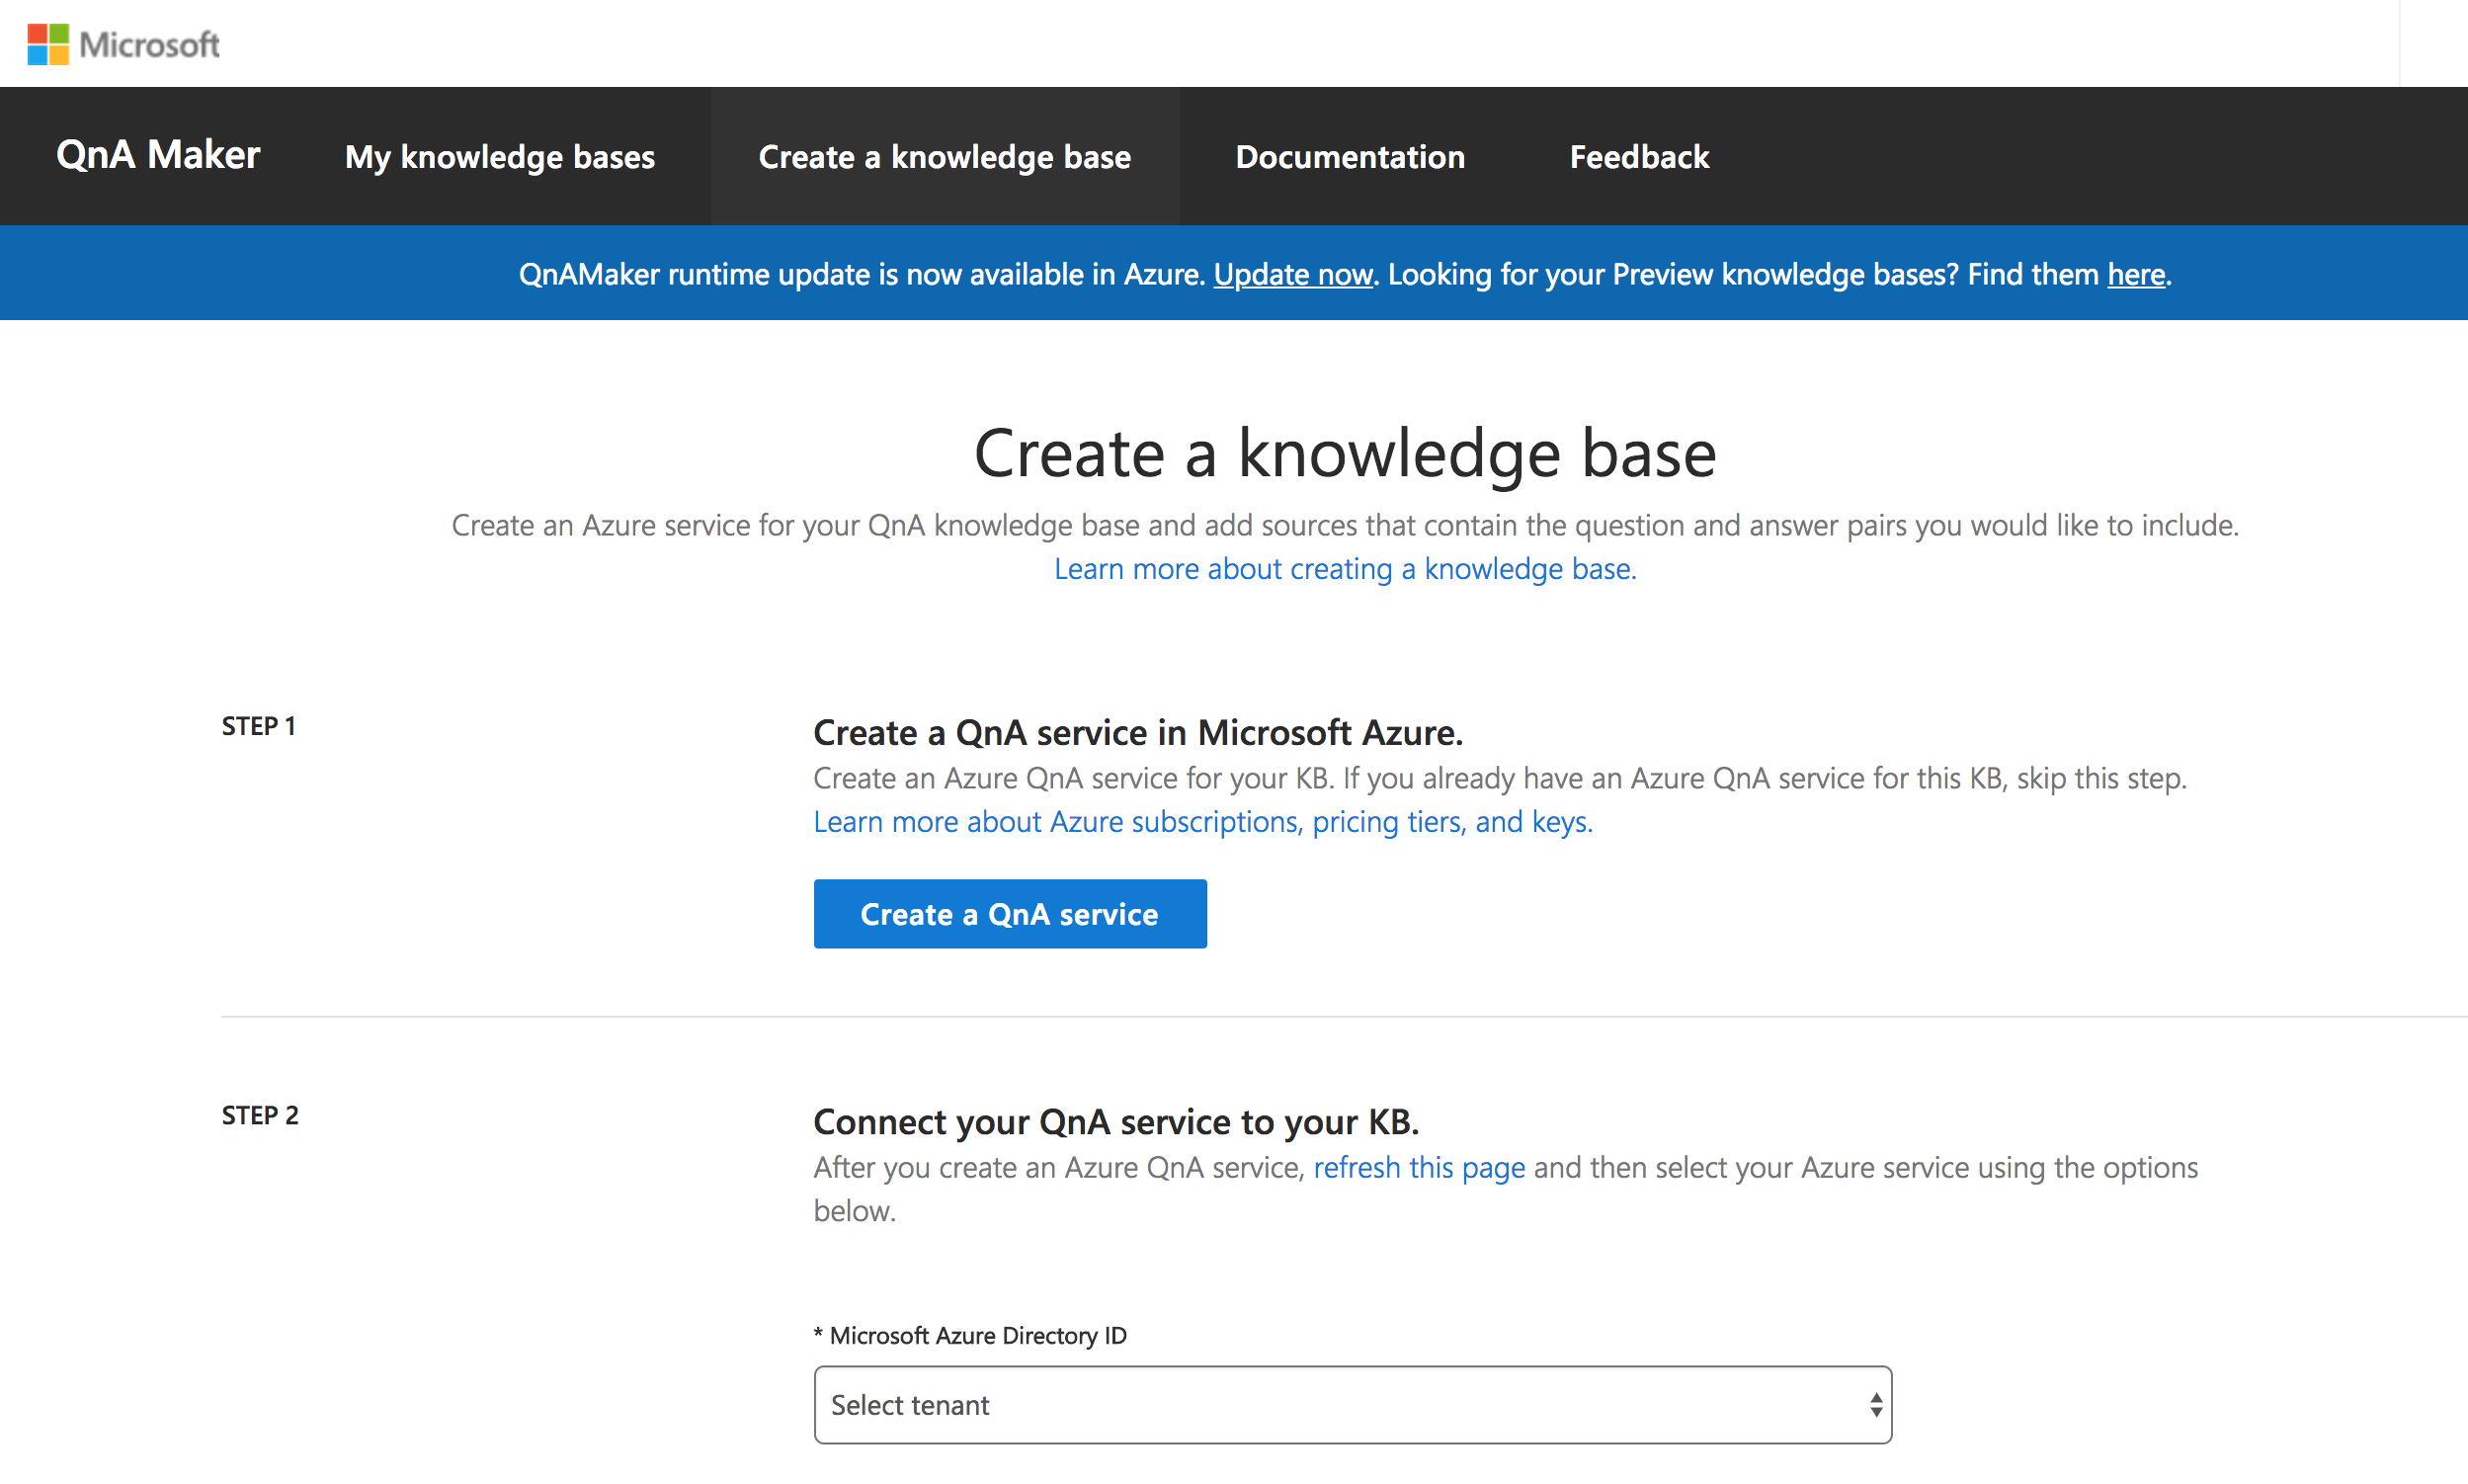 Follow the 5 steps provided by Microsoft to create your knowledge base bot